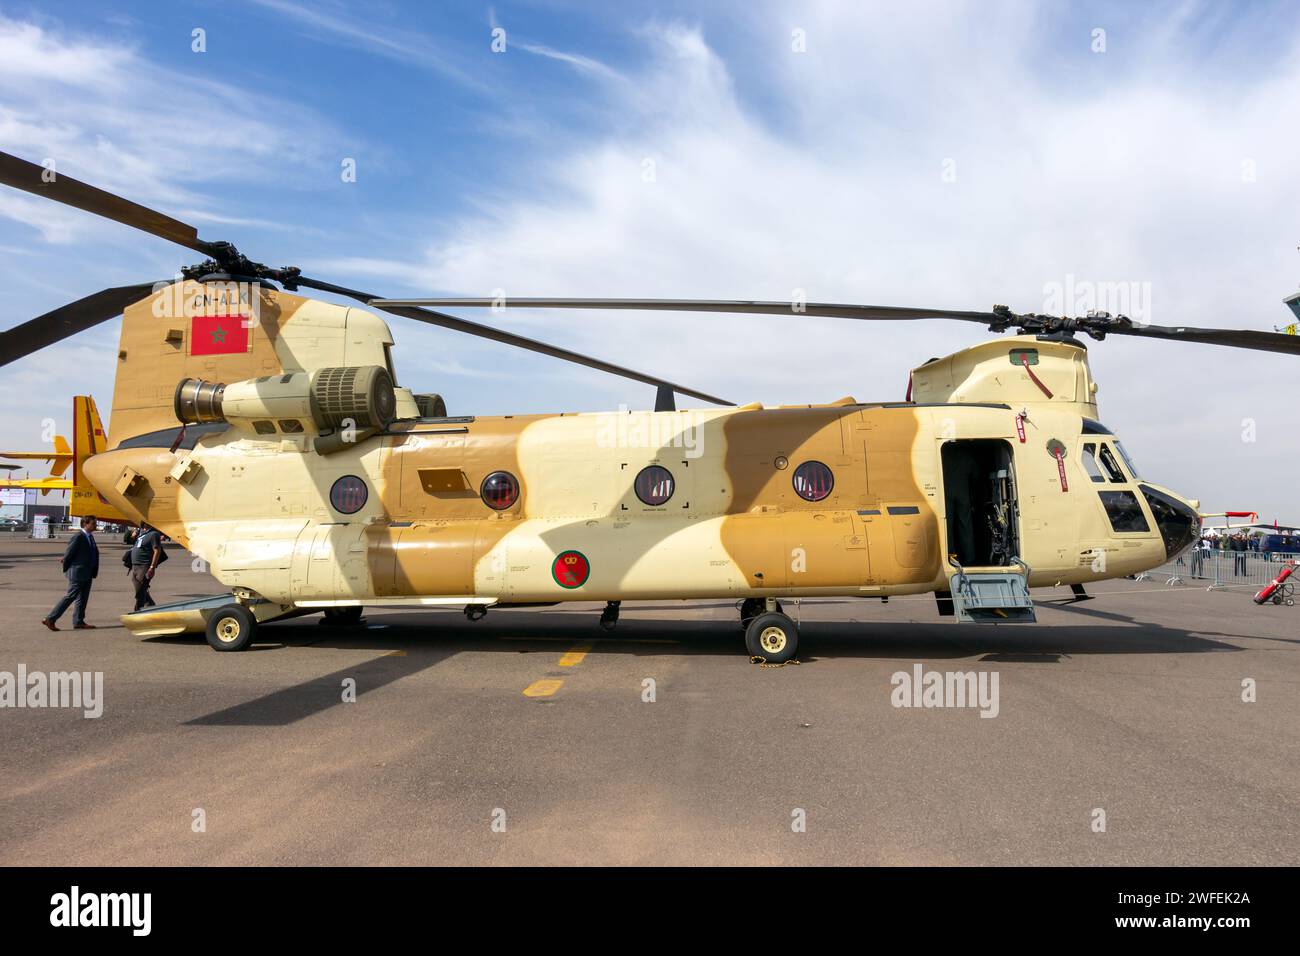 Royal Moroccan Air Force Boeing CH-47D Chinook transport helicopter at the Marrakech Air Show. Marrakesh, Morocco - April 28, 2016 Stock Photo